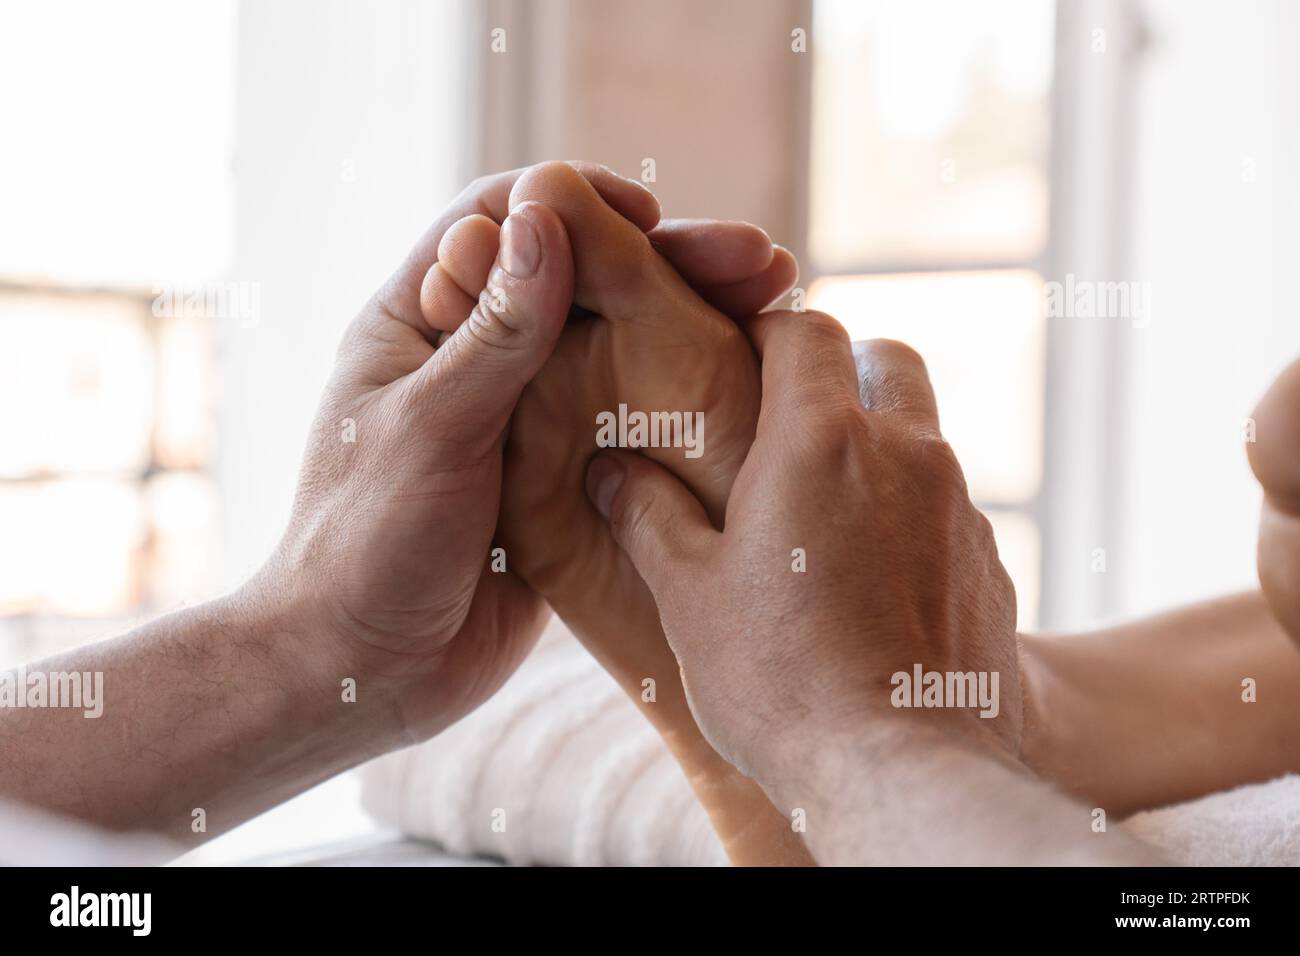 Foot reflexology massage. Male masseur performs acupressure on a woman's foot. Luminous background. Selective focus. Stock Photo